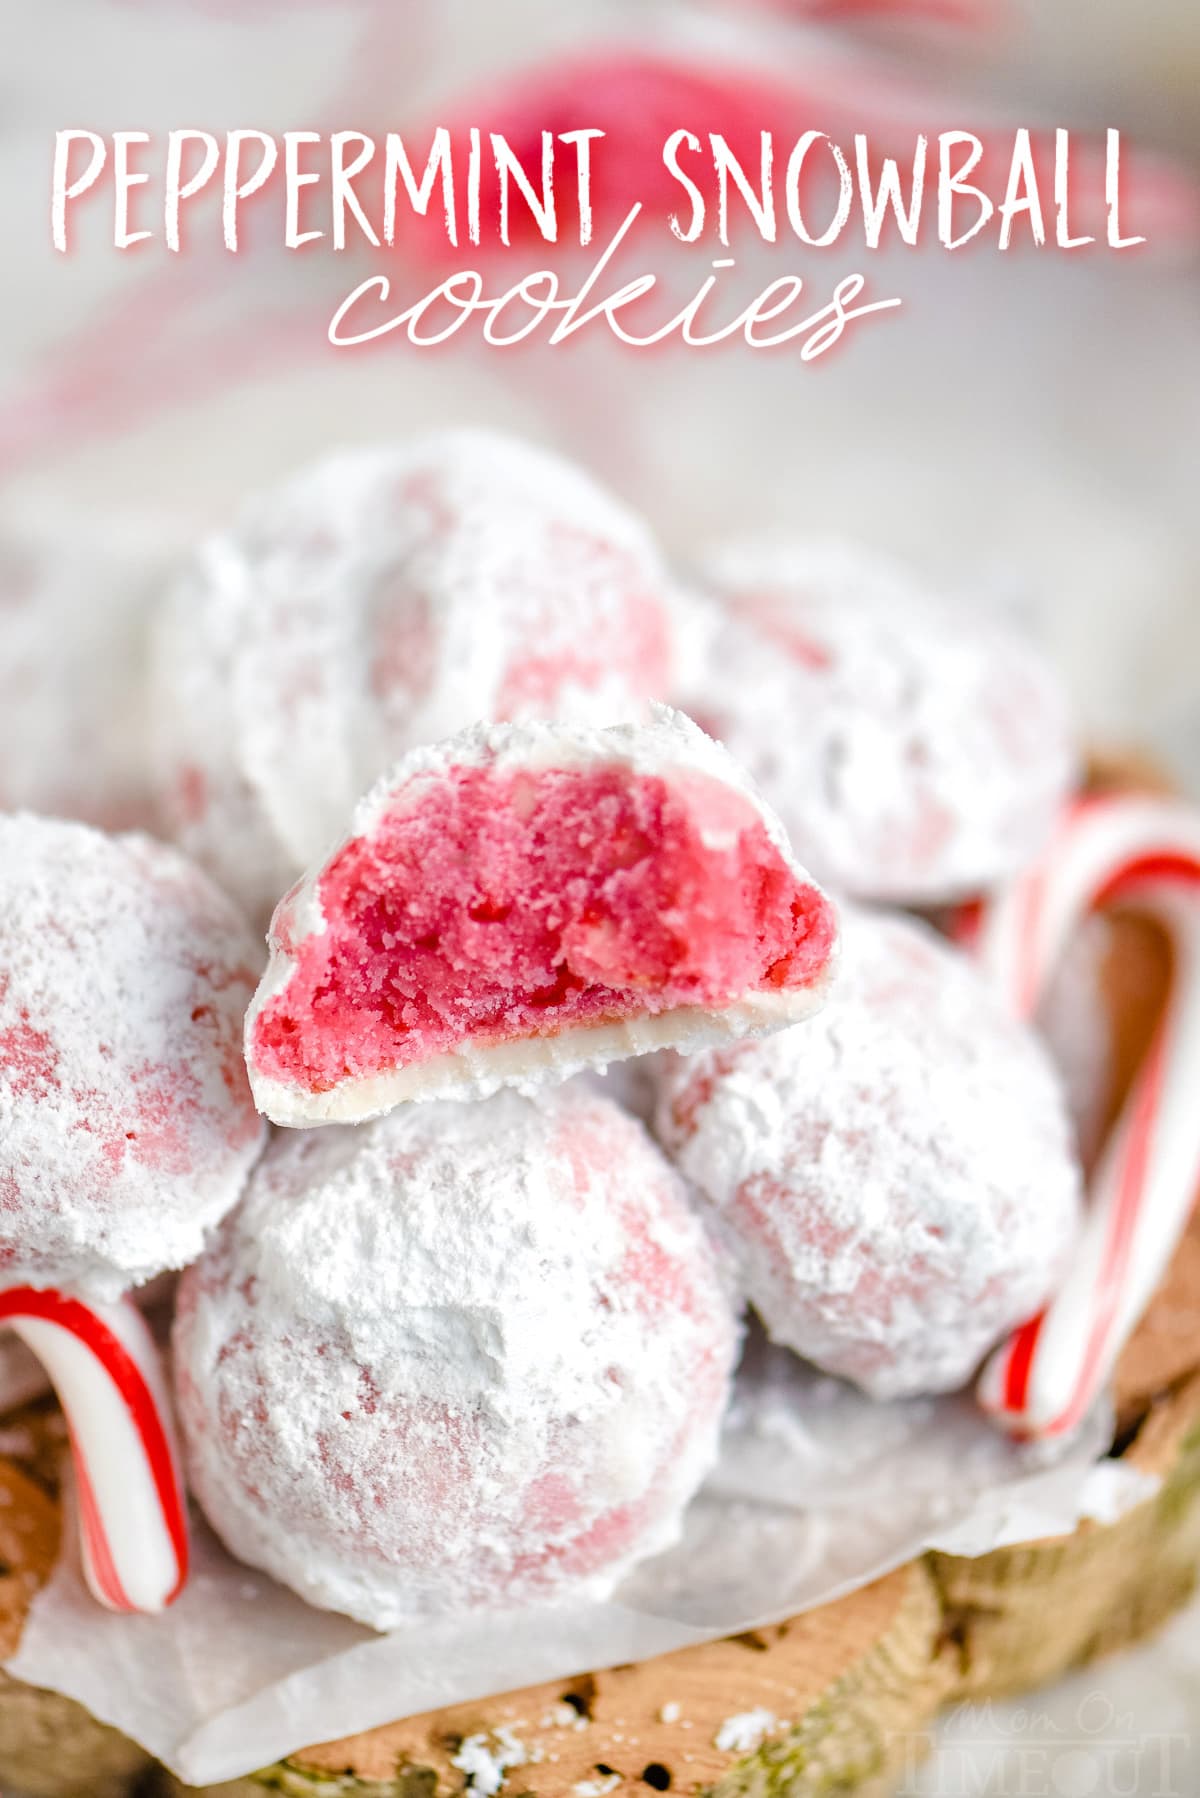 peppermint snowball cookies in a pile with one cookie broken in half showing the pink interior with title overlay at top of image